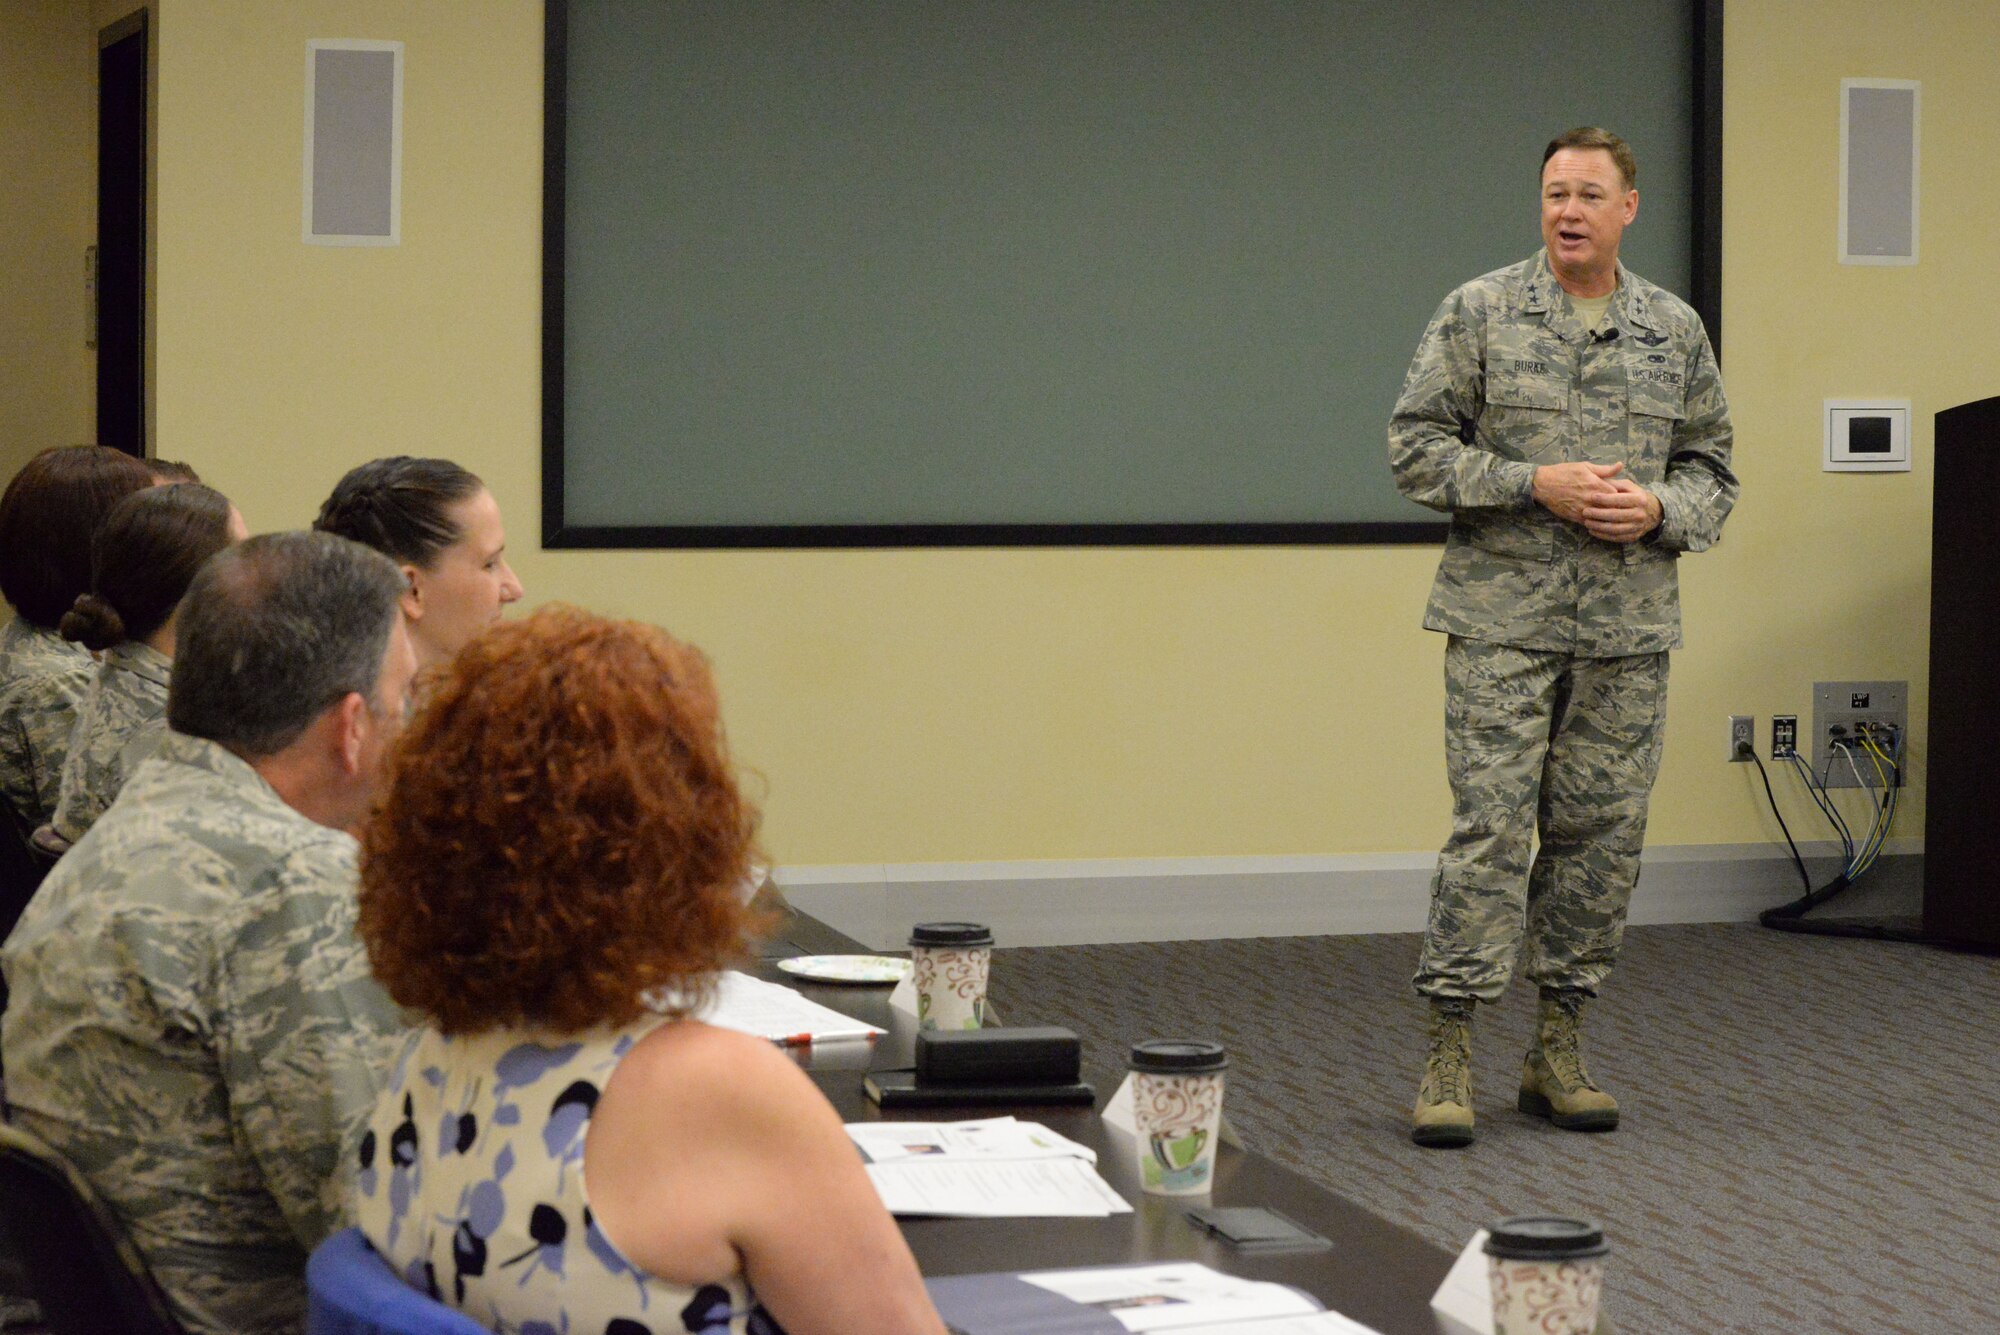 Air Force District of Washington Commander Maj. Gen. Darryl Burke gives opening remarks during the 2016 AFDW Commander’s Course at Joint Base Andrews, Md., June 6, 2016. Officers and their spouses will attend during a four-day course designed to equip them for the unique issues of commanding an organization in the National Capital Region. (U.S. Air Force photo/ Courtesy)